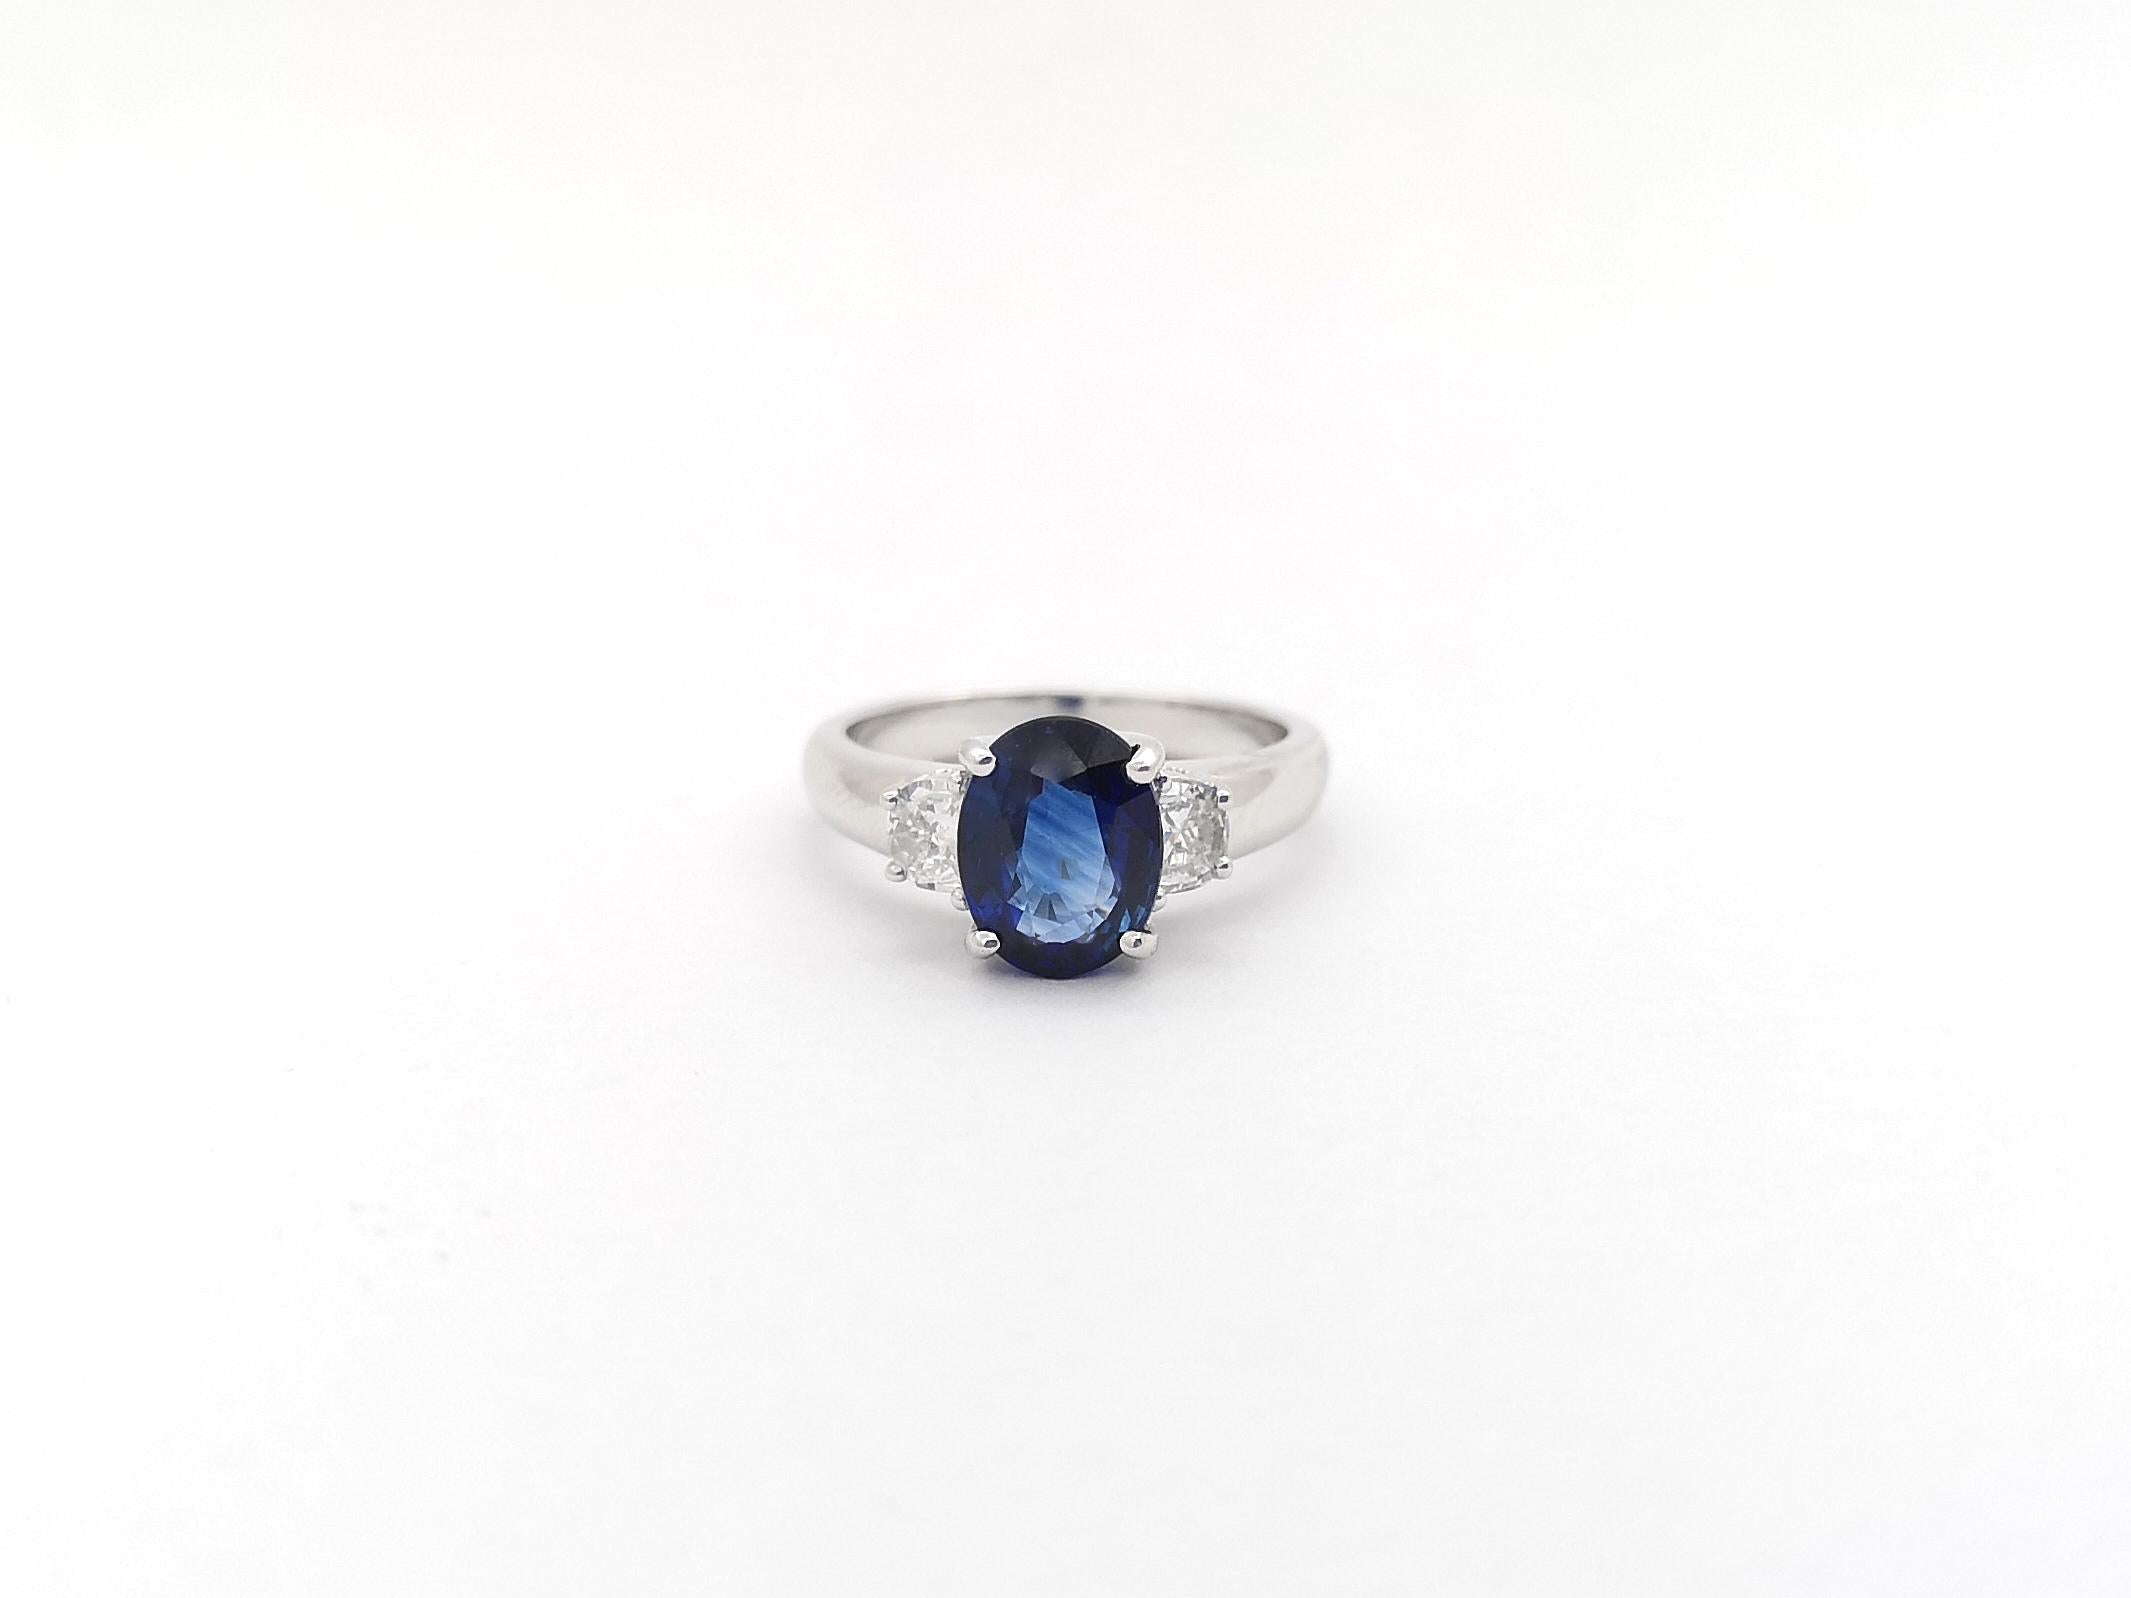 GIA Certified Blue Sapphire with Diamond Ring set in Platinum 950 Settings For Sale 4